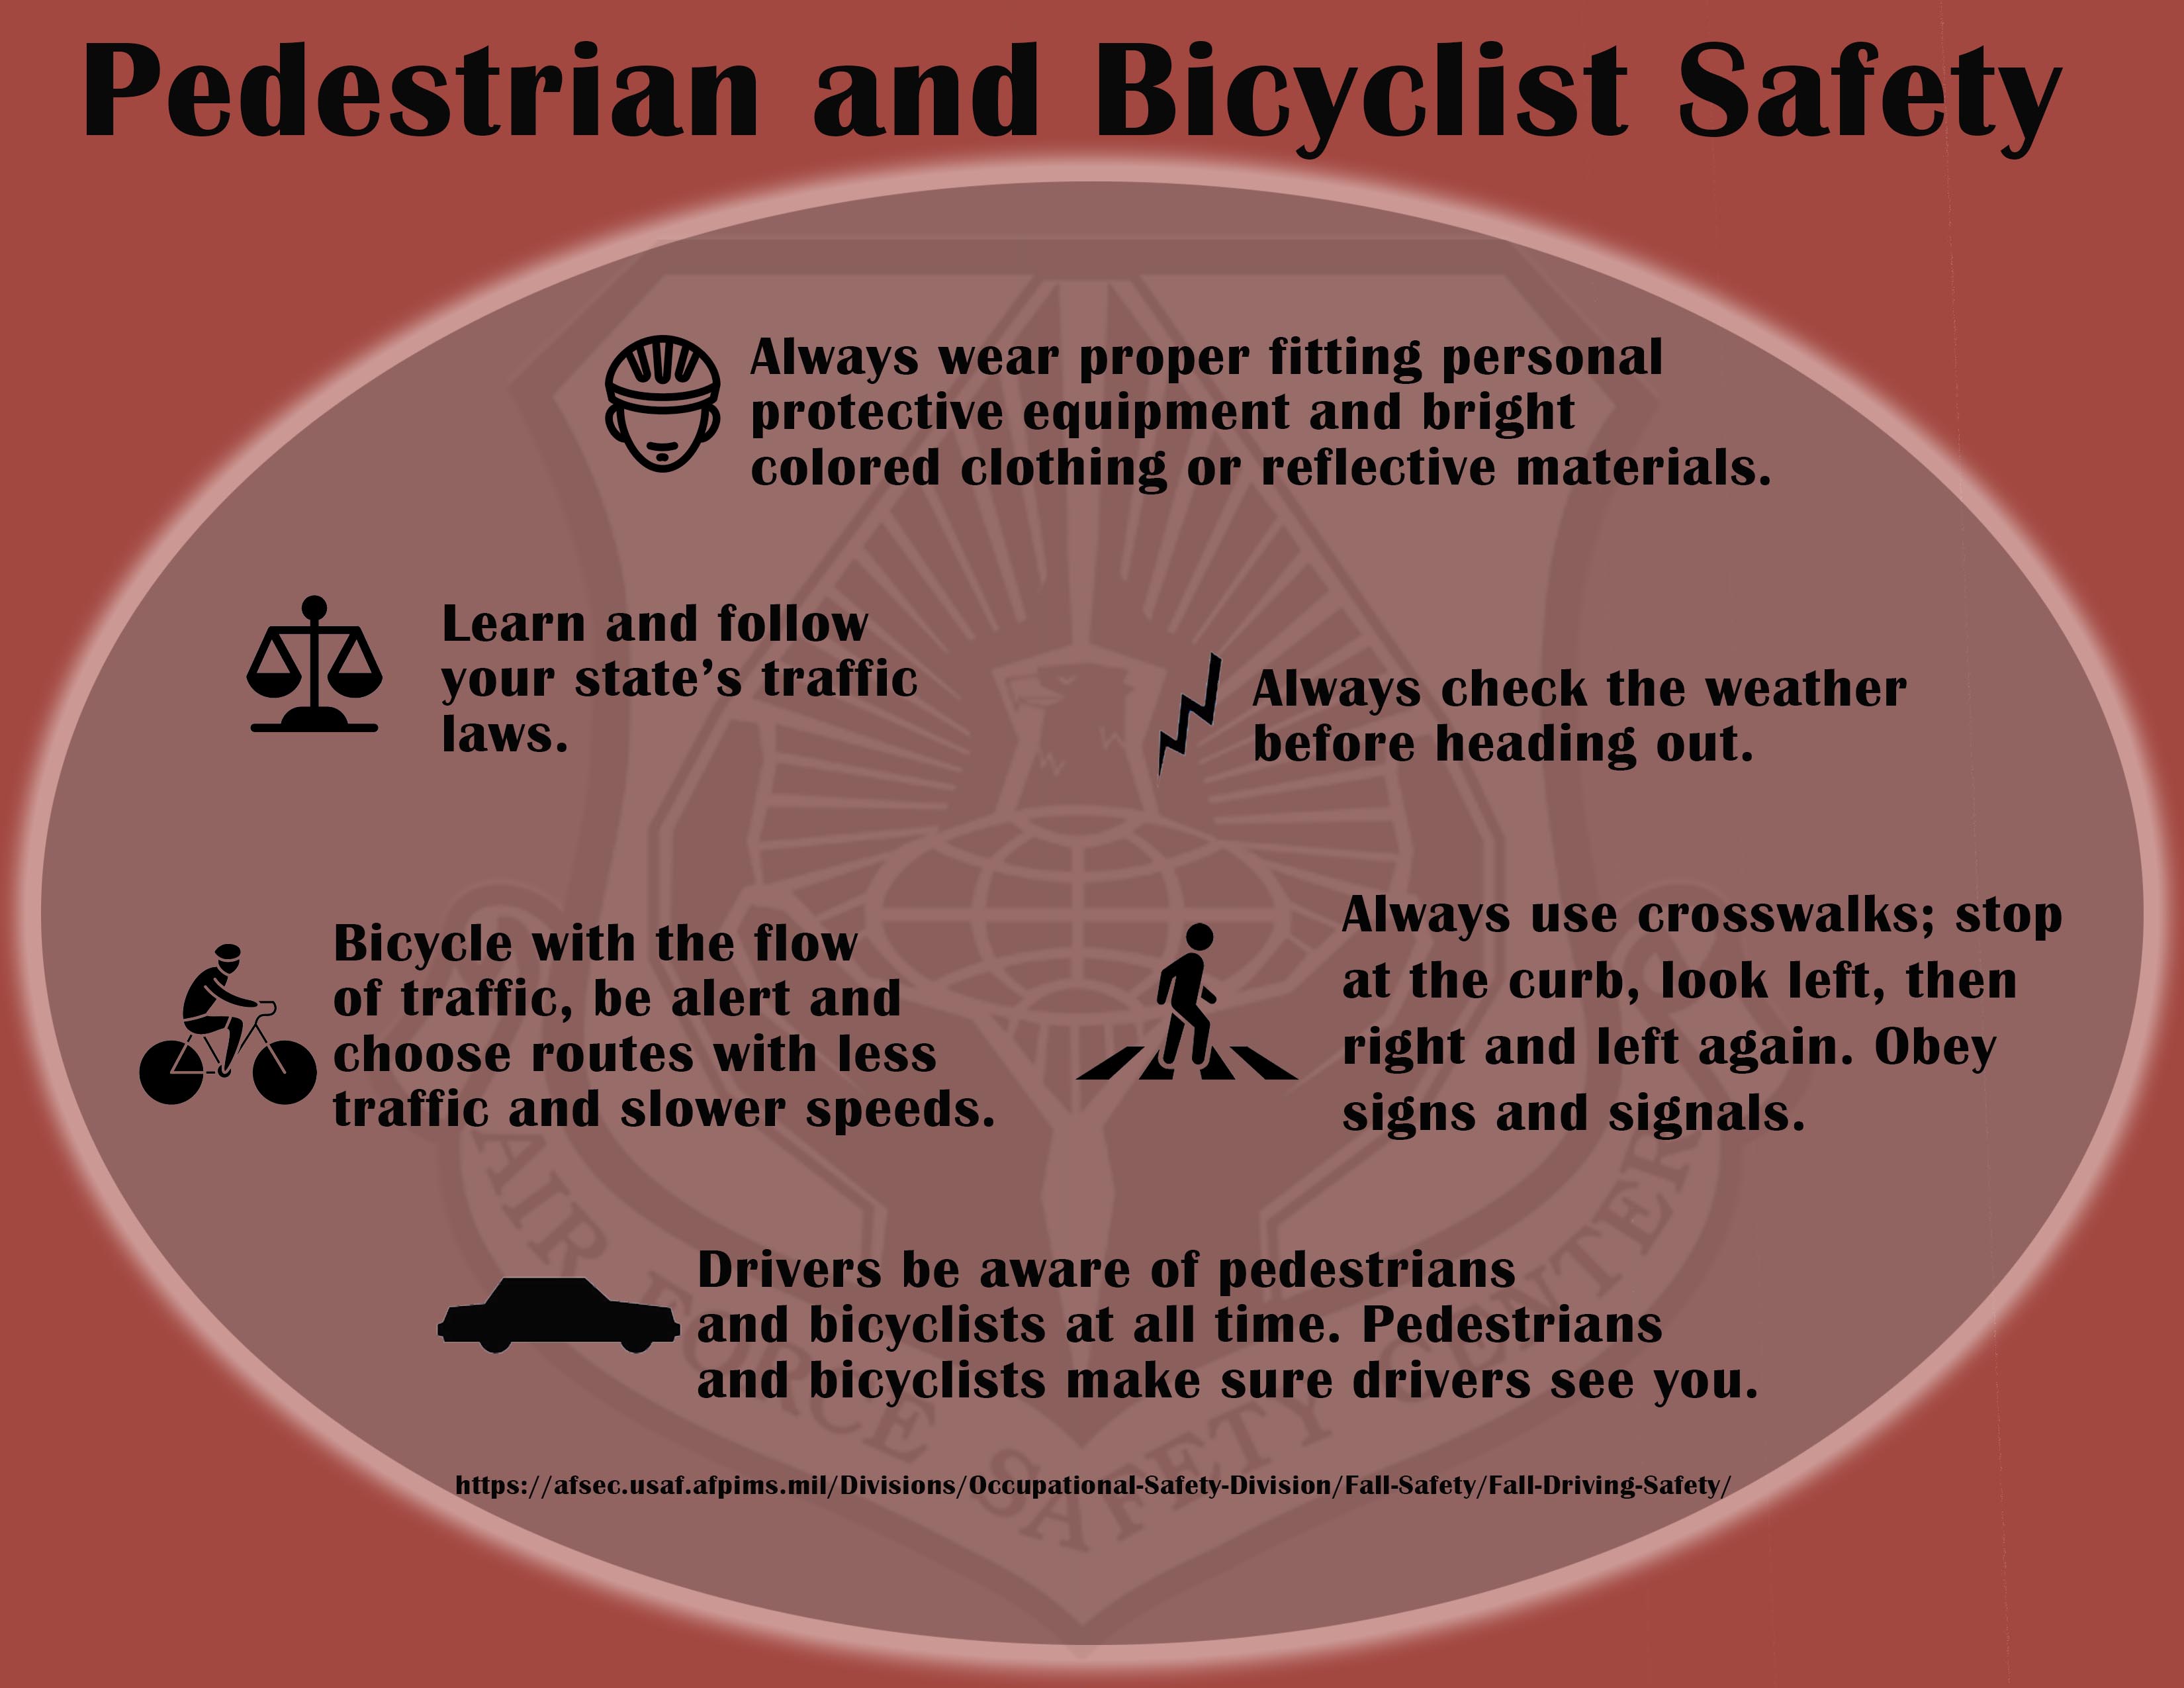 Pedestrian and Bicycle Safety Tips poster